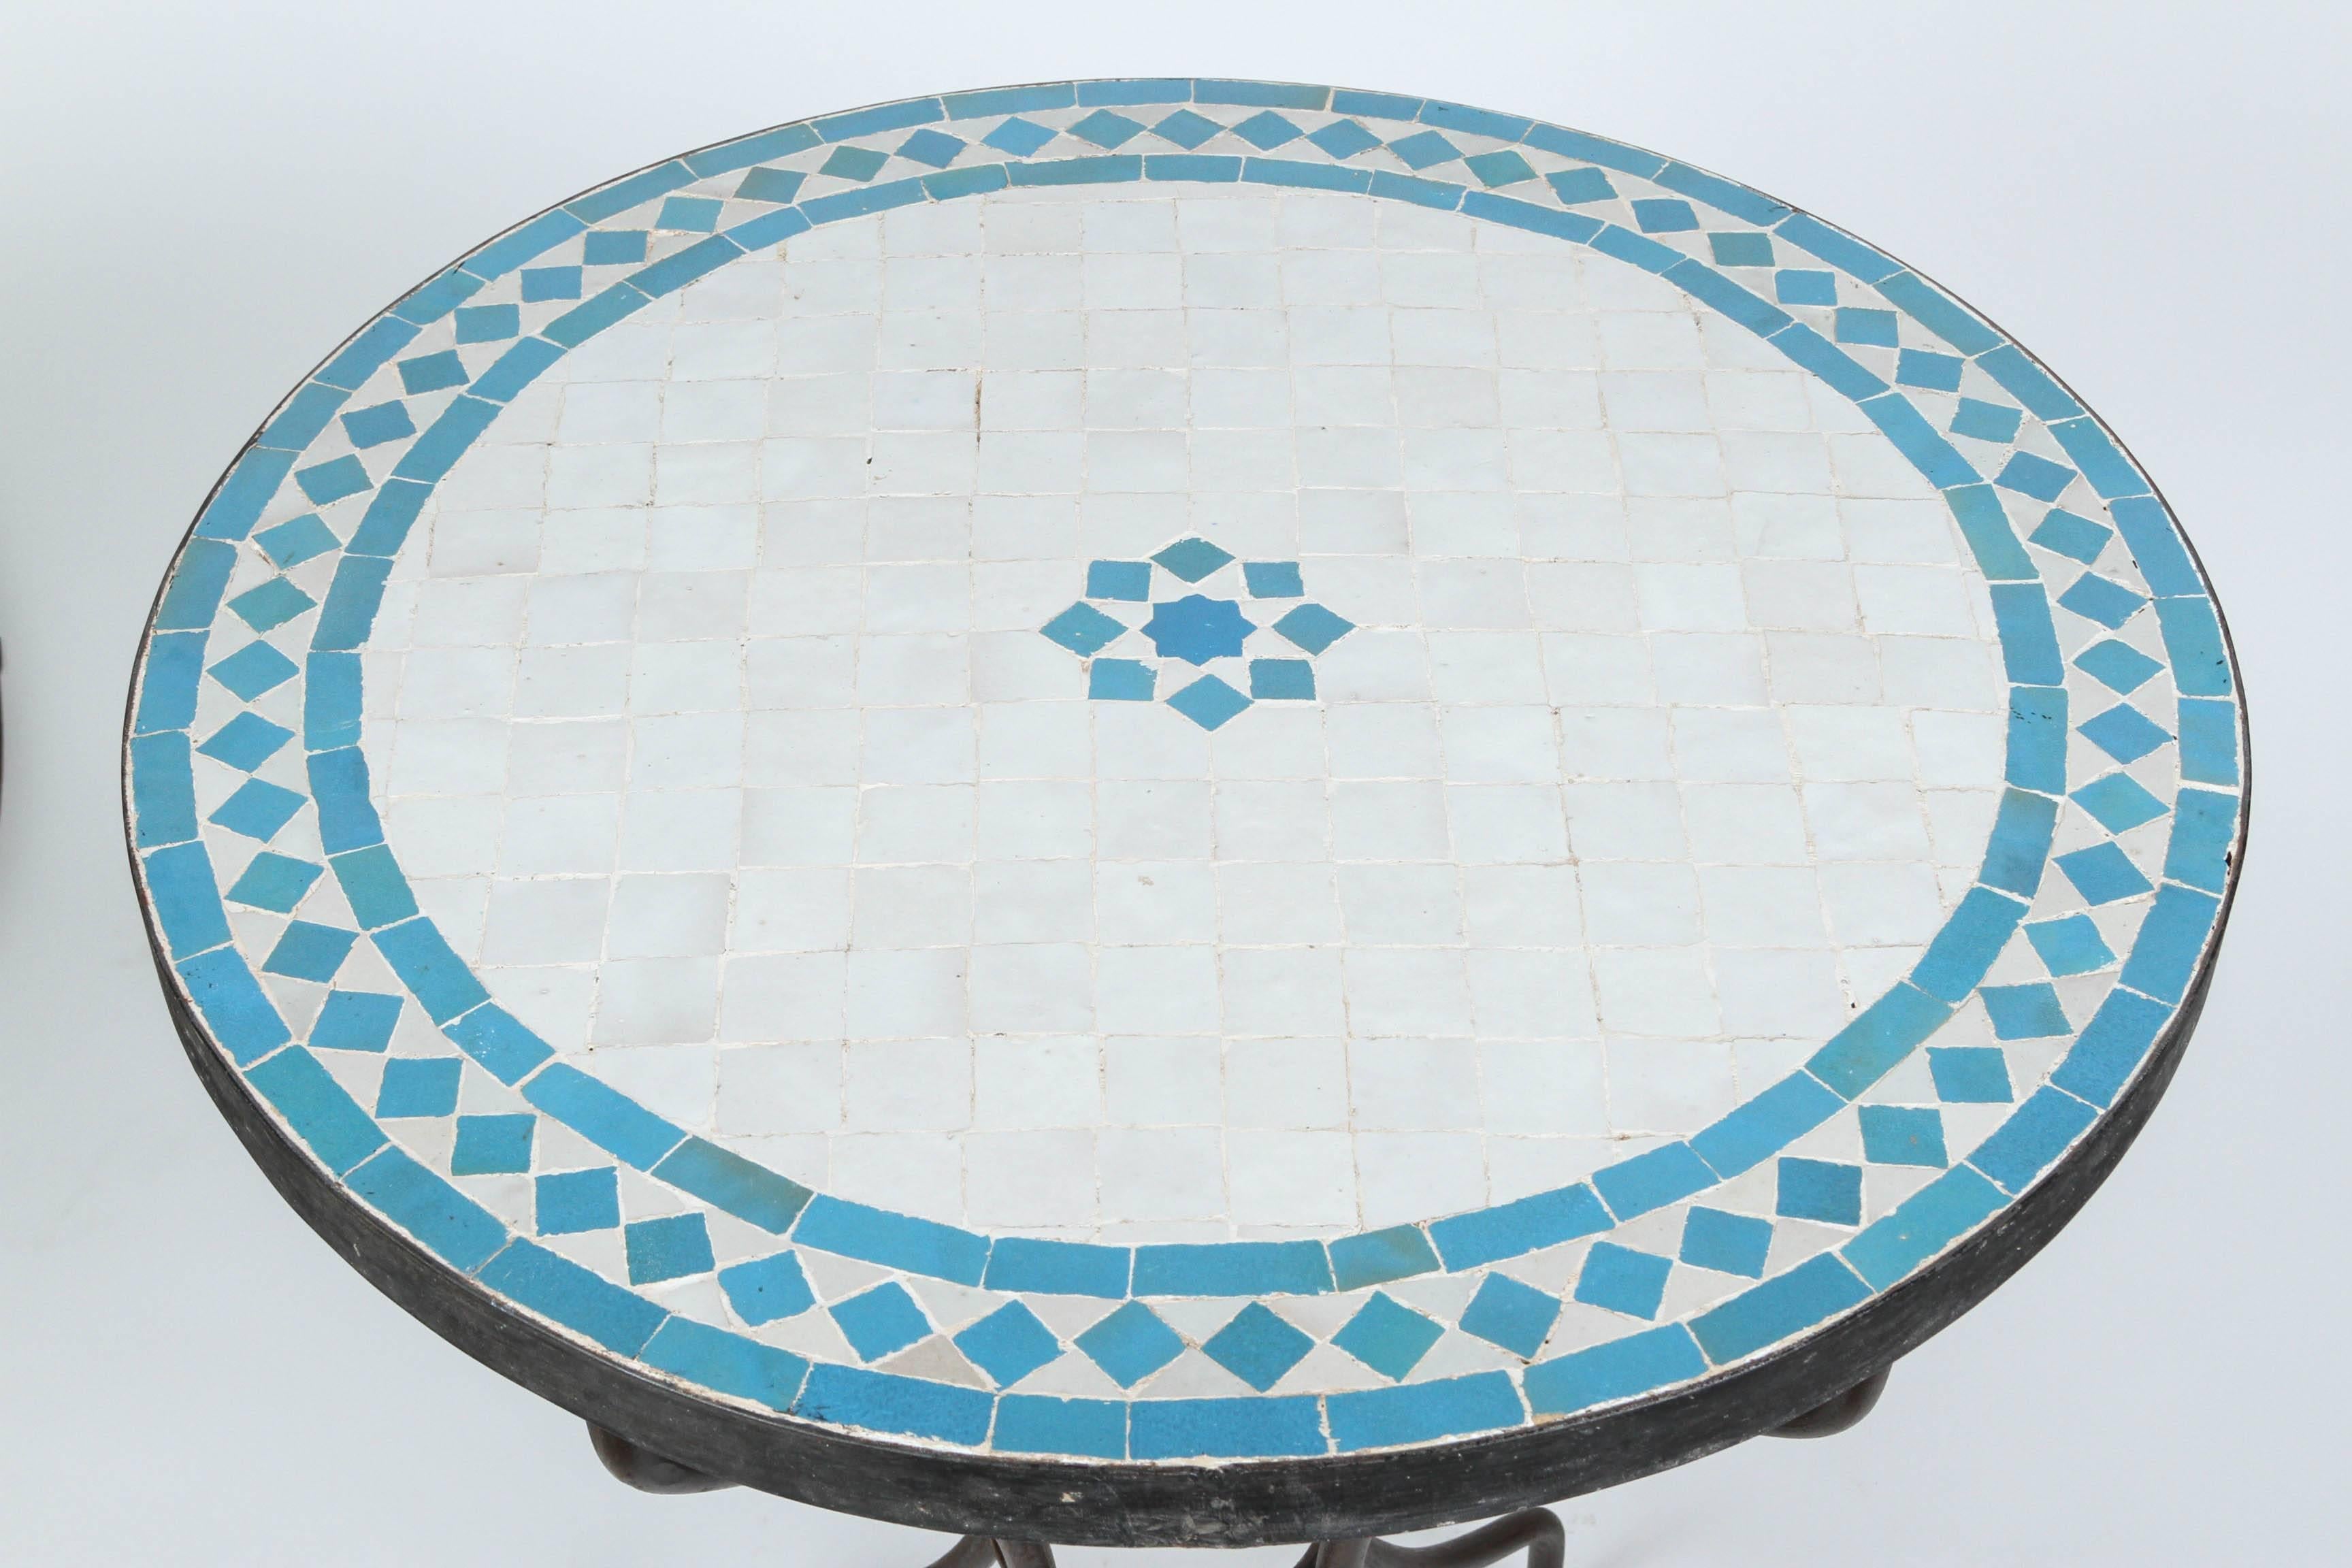 Moroccan mosaic tile bistro table on iron base.
Handmade by expert artisans in Fez, Morocco using reclaimed old glazed tiles inlaid in concrete using reclaimed old glazed tiles and making beautiful geometrical designs, colors are turquoise blue and